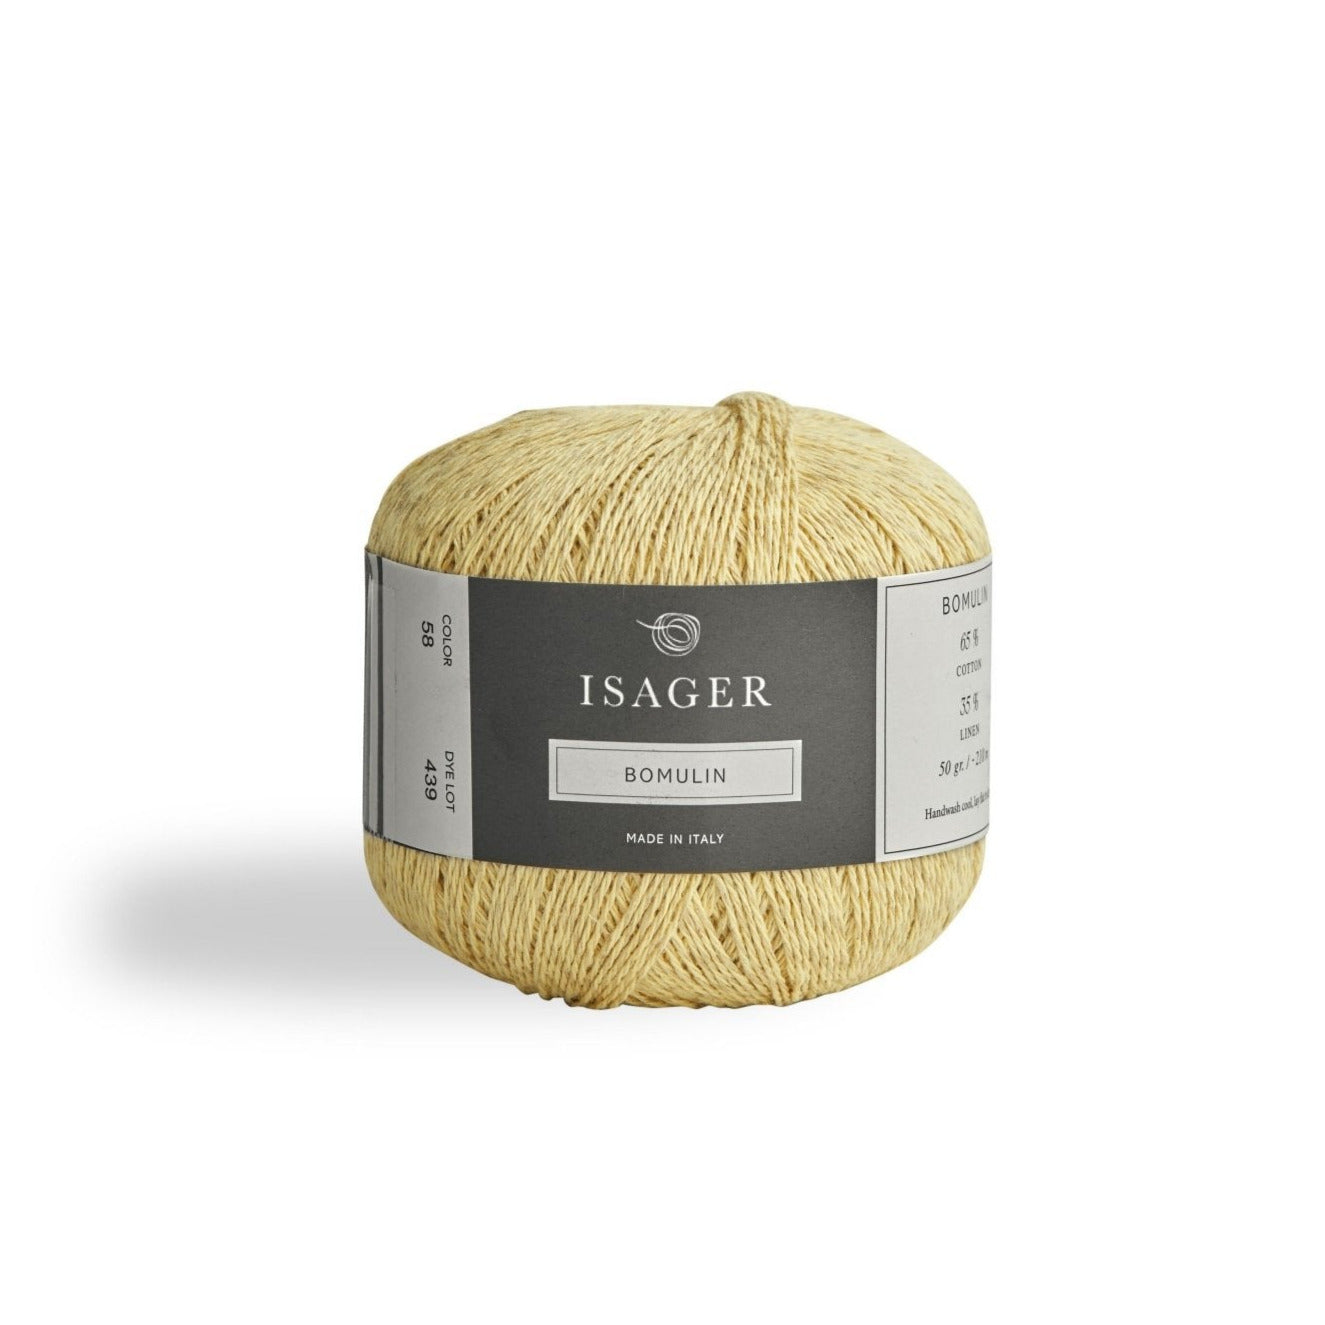 Isager Bomulin - 58 - 3 Ply - Cotton - The Little Yarn Store